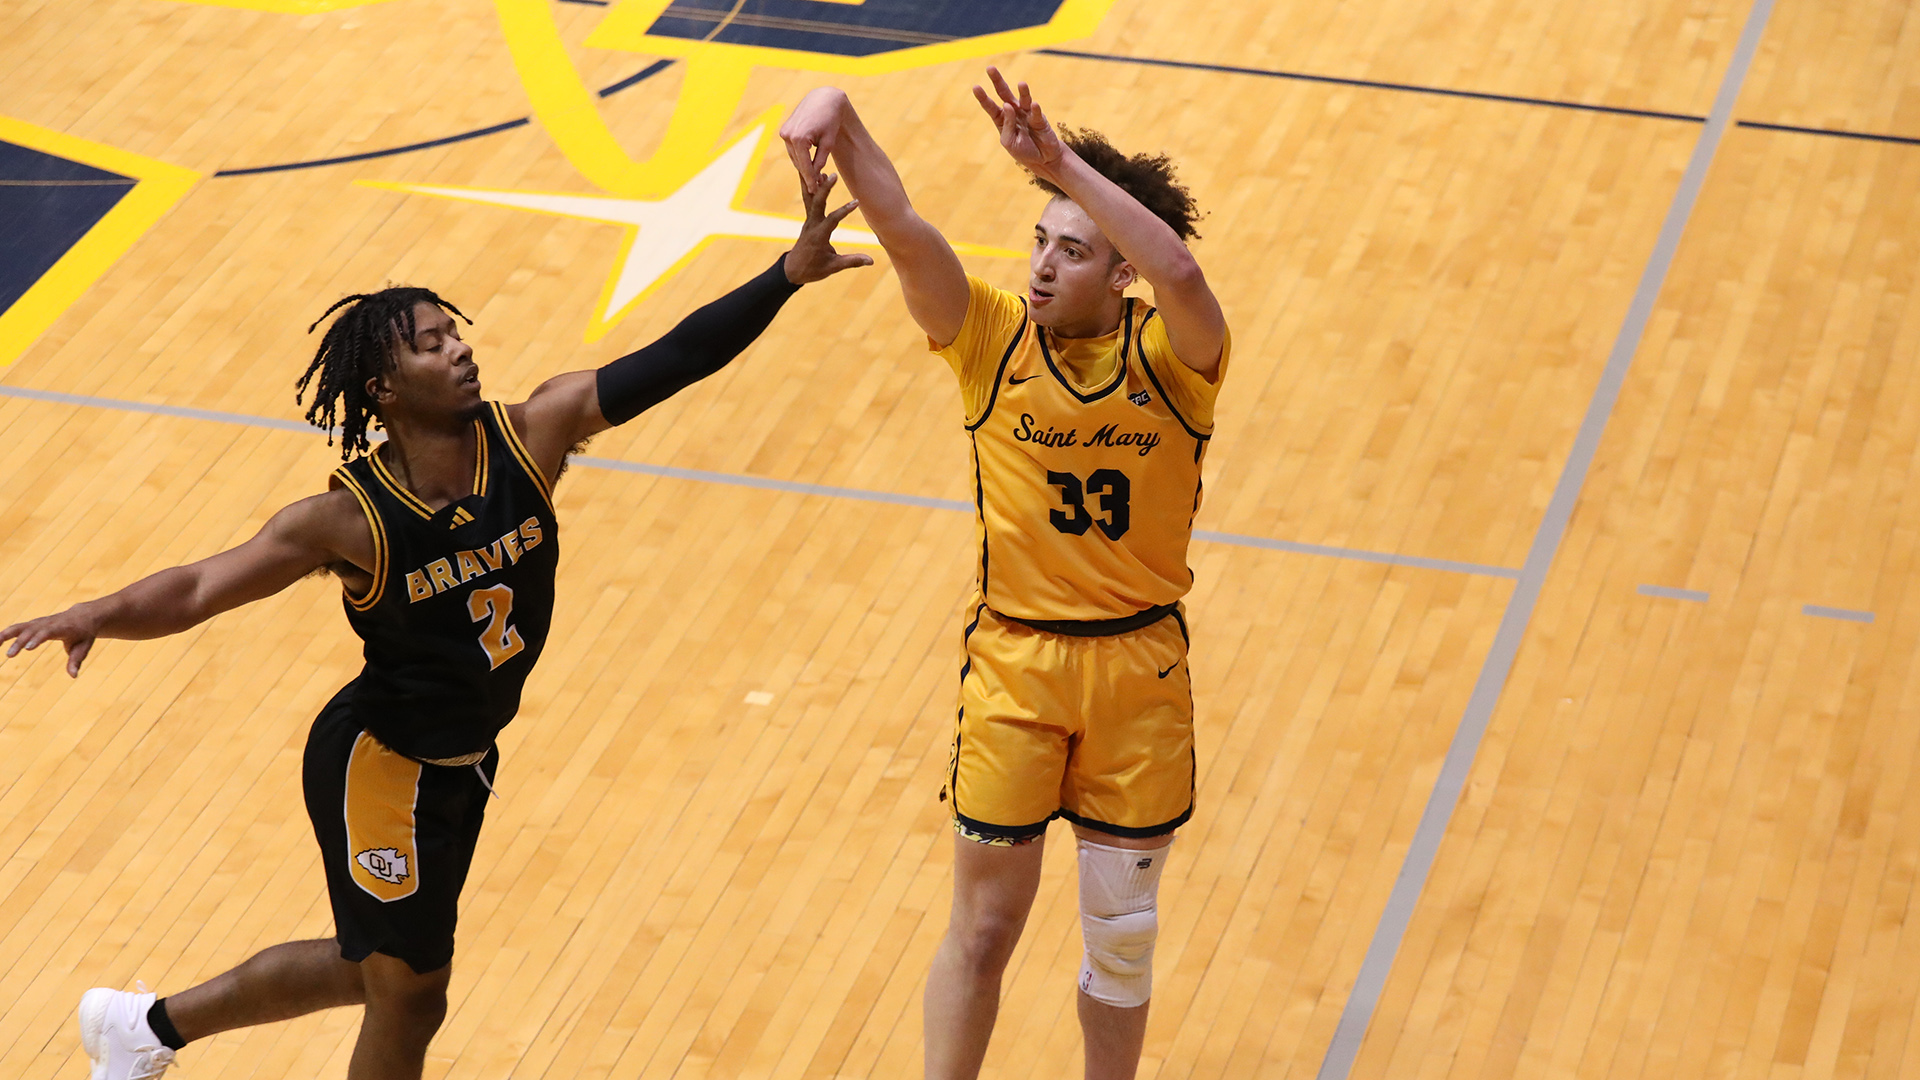 Bonner Has 22-Points With Seven Threes in Win Over Avila